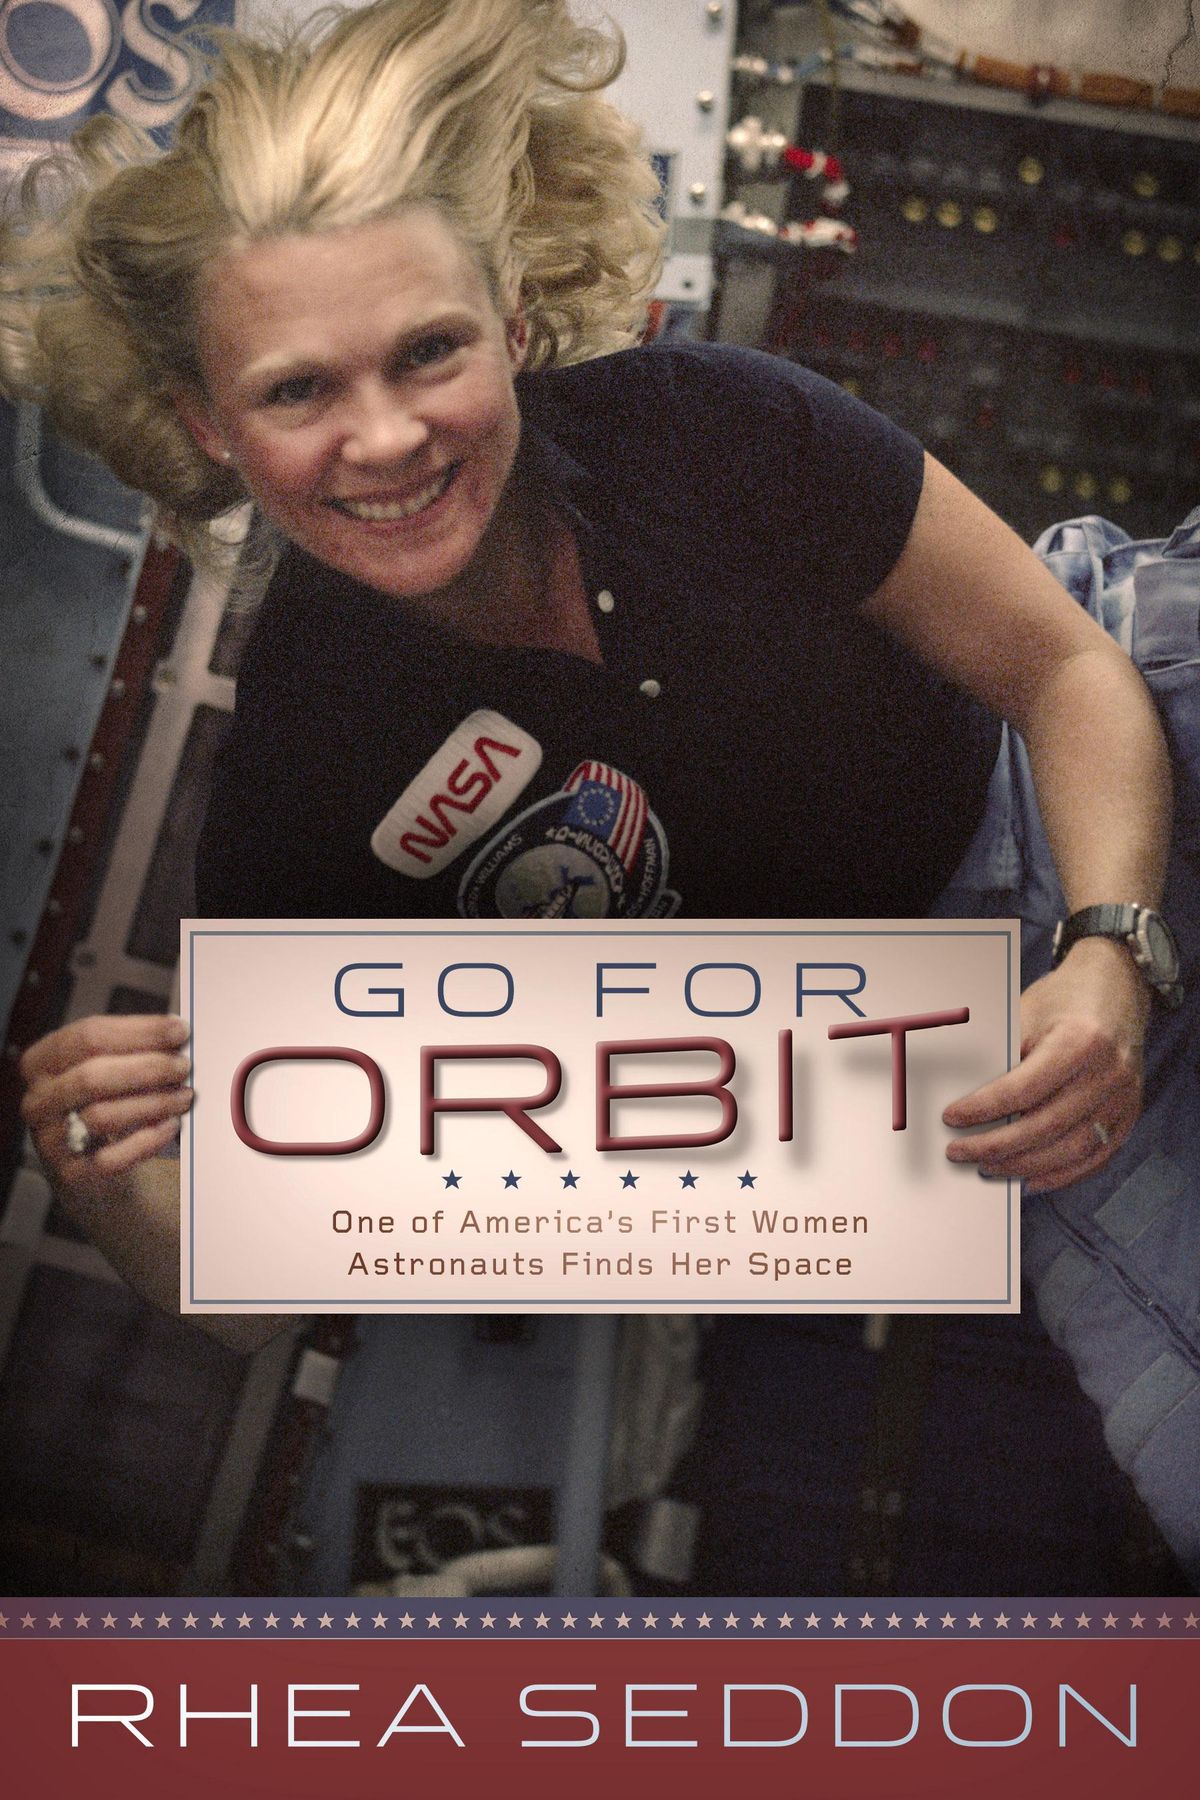 Dr. Rhea Seddon’s 2015 book, “Go For Orbit,” chronicles her time as a surgeon and astronaut doing life science research for NASA. (Rhea Seddon / Courtesy)